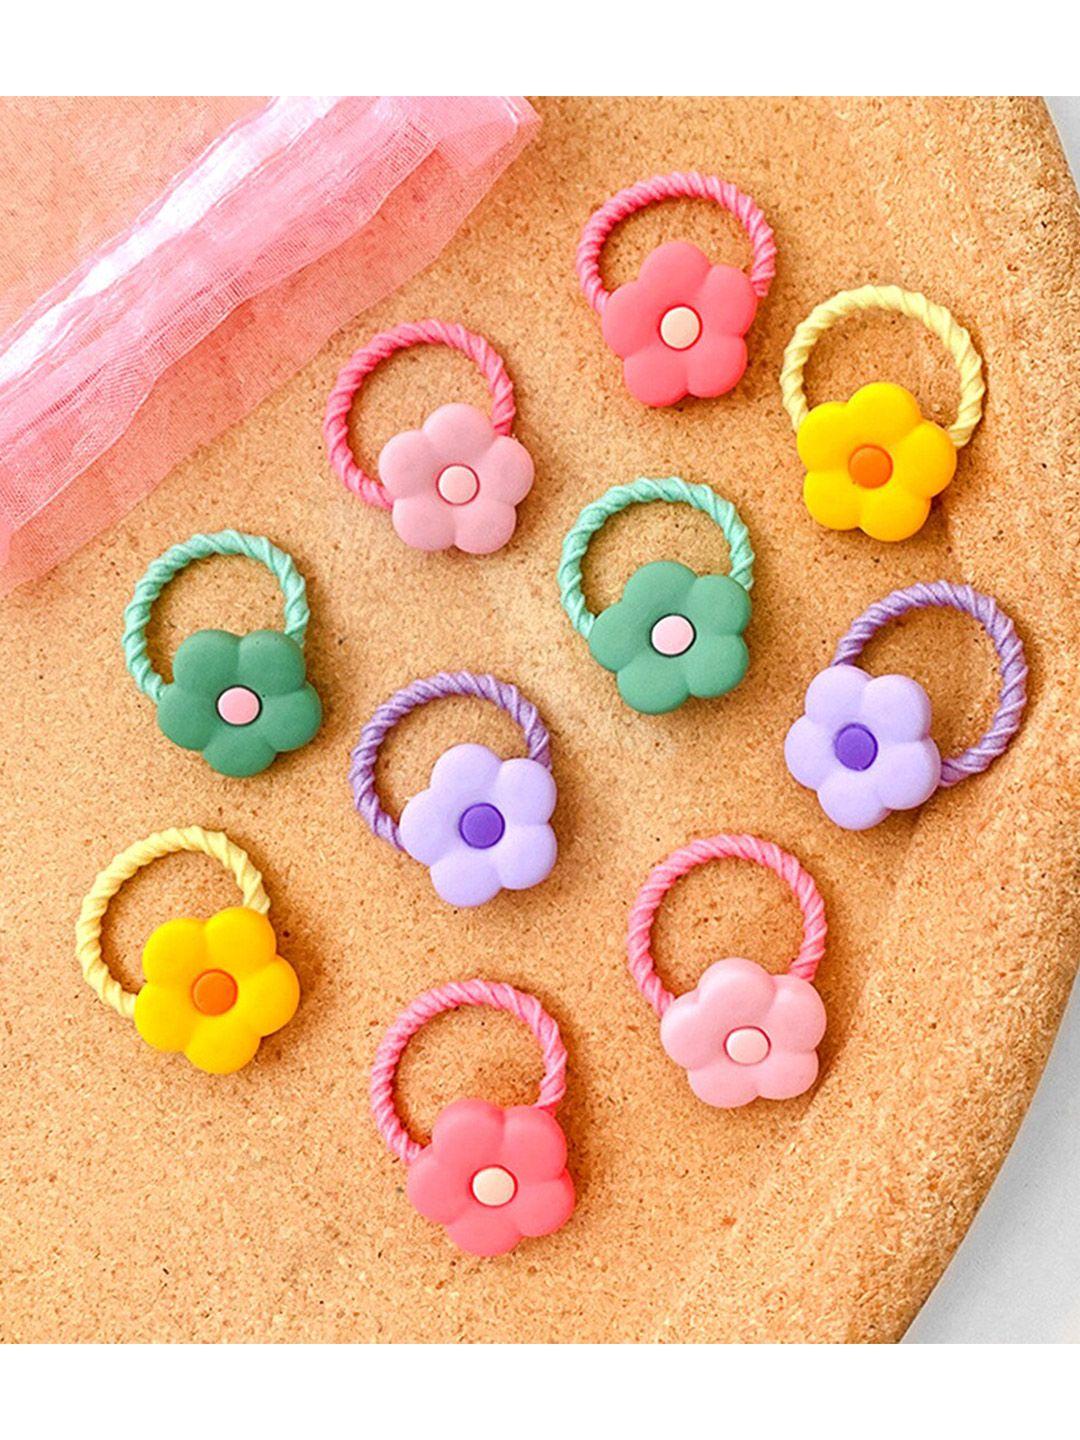 melbees by yellow chimes girls set of 20 hair clips and floral shaped rubber bands